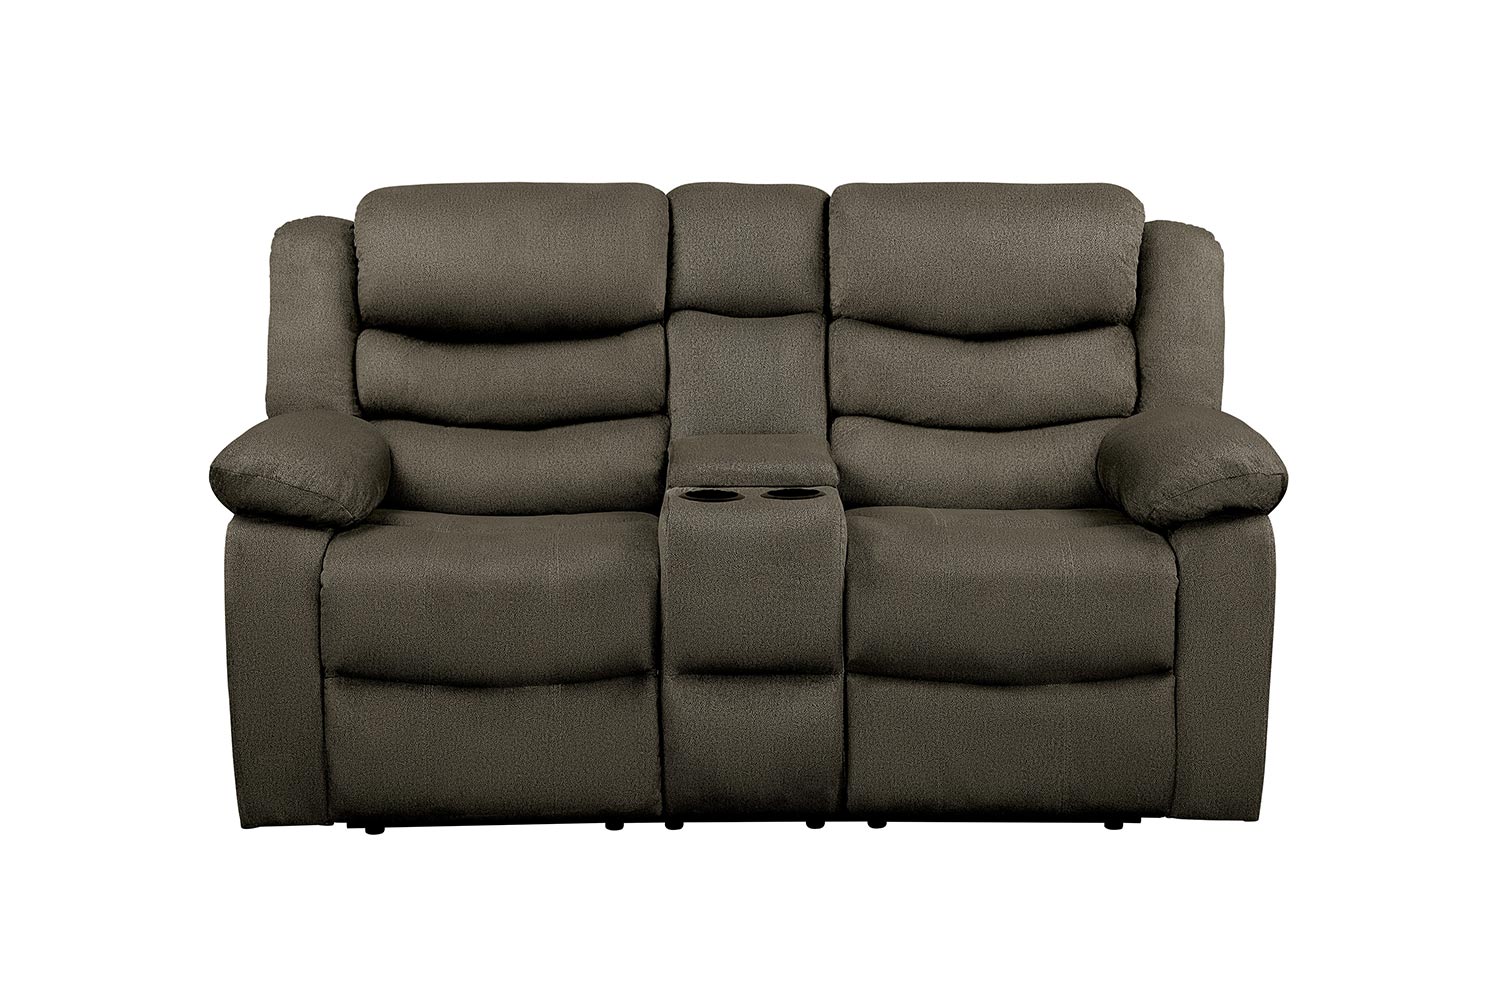 Homelegance Discus Double Reclining Love Seat with Center Console - Brown